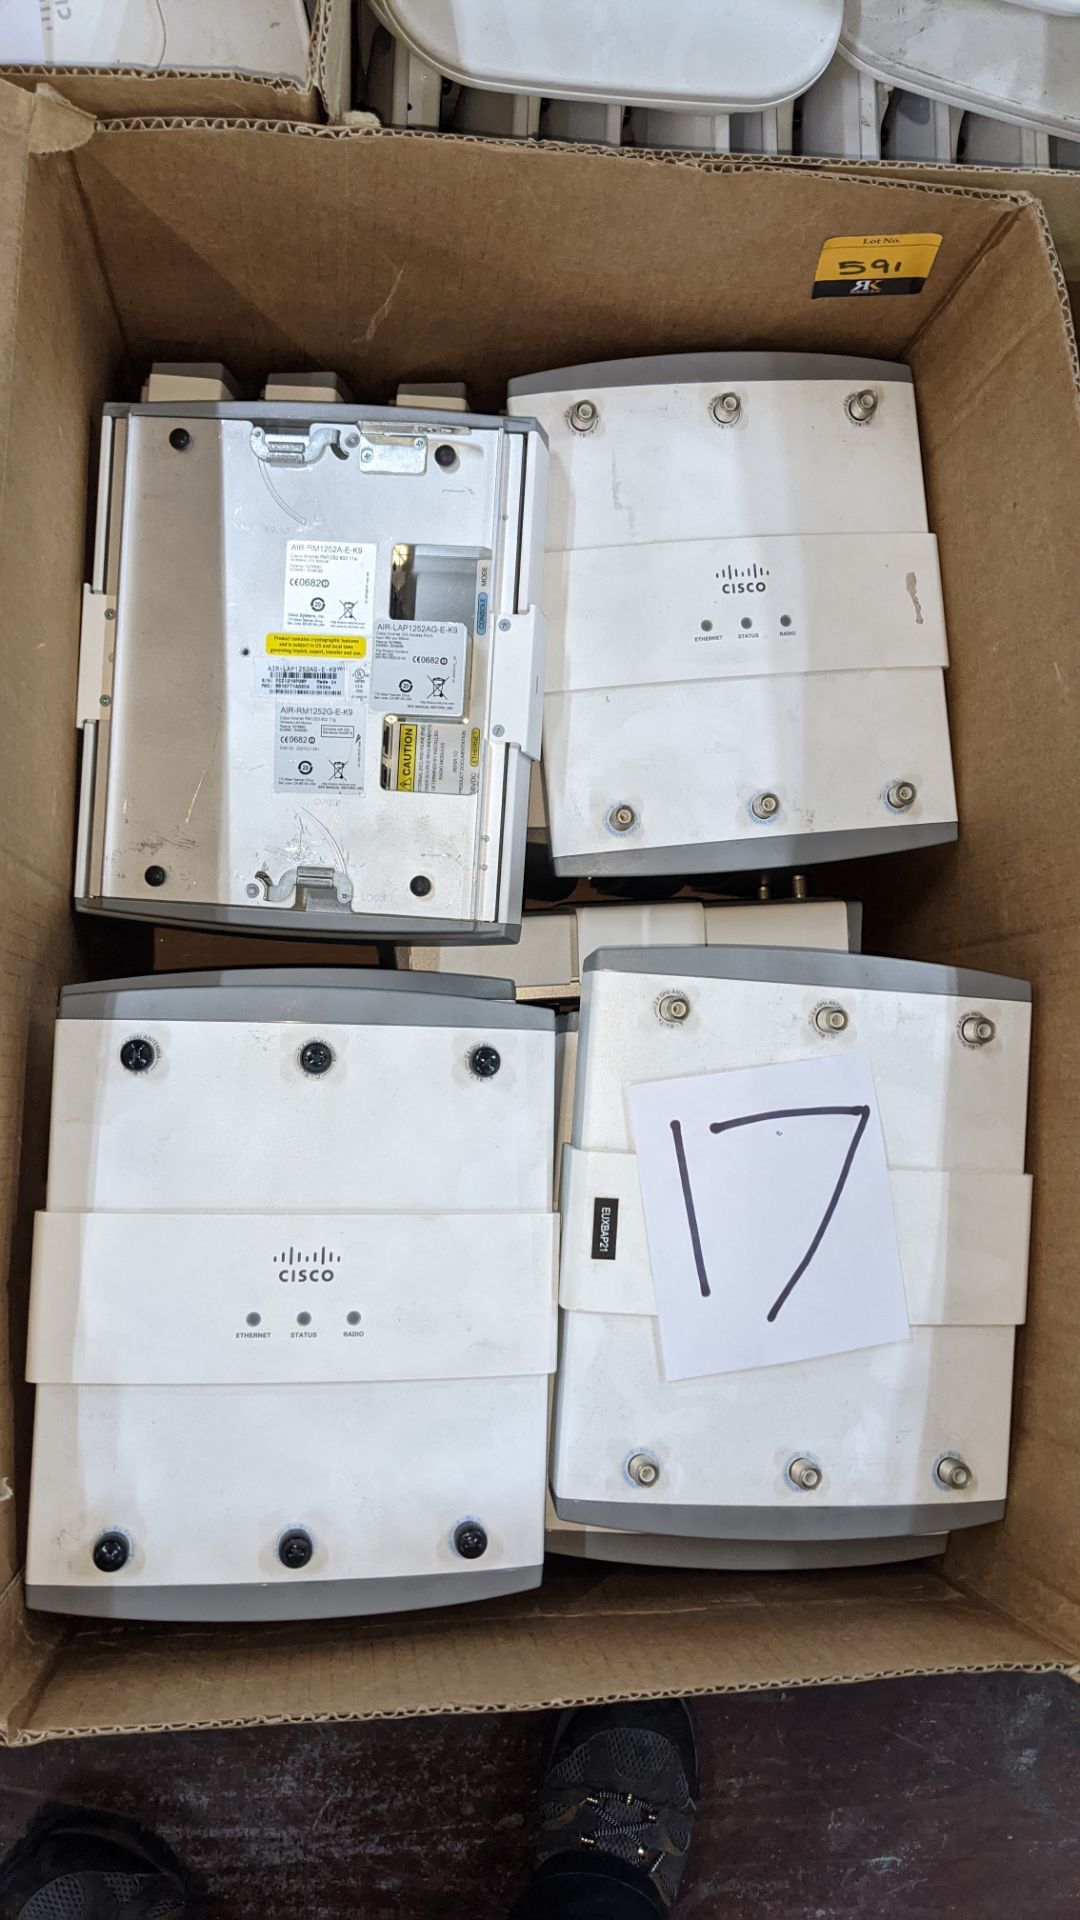 17 off Cisco wireless access points model 1252 - main unit only, no power supply or box - Image 2 of 4